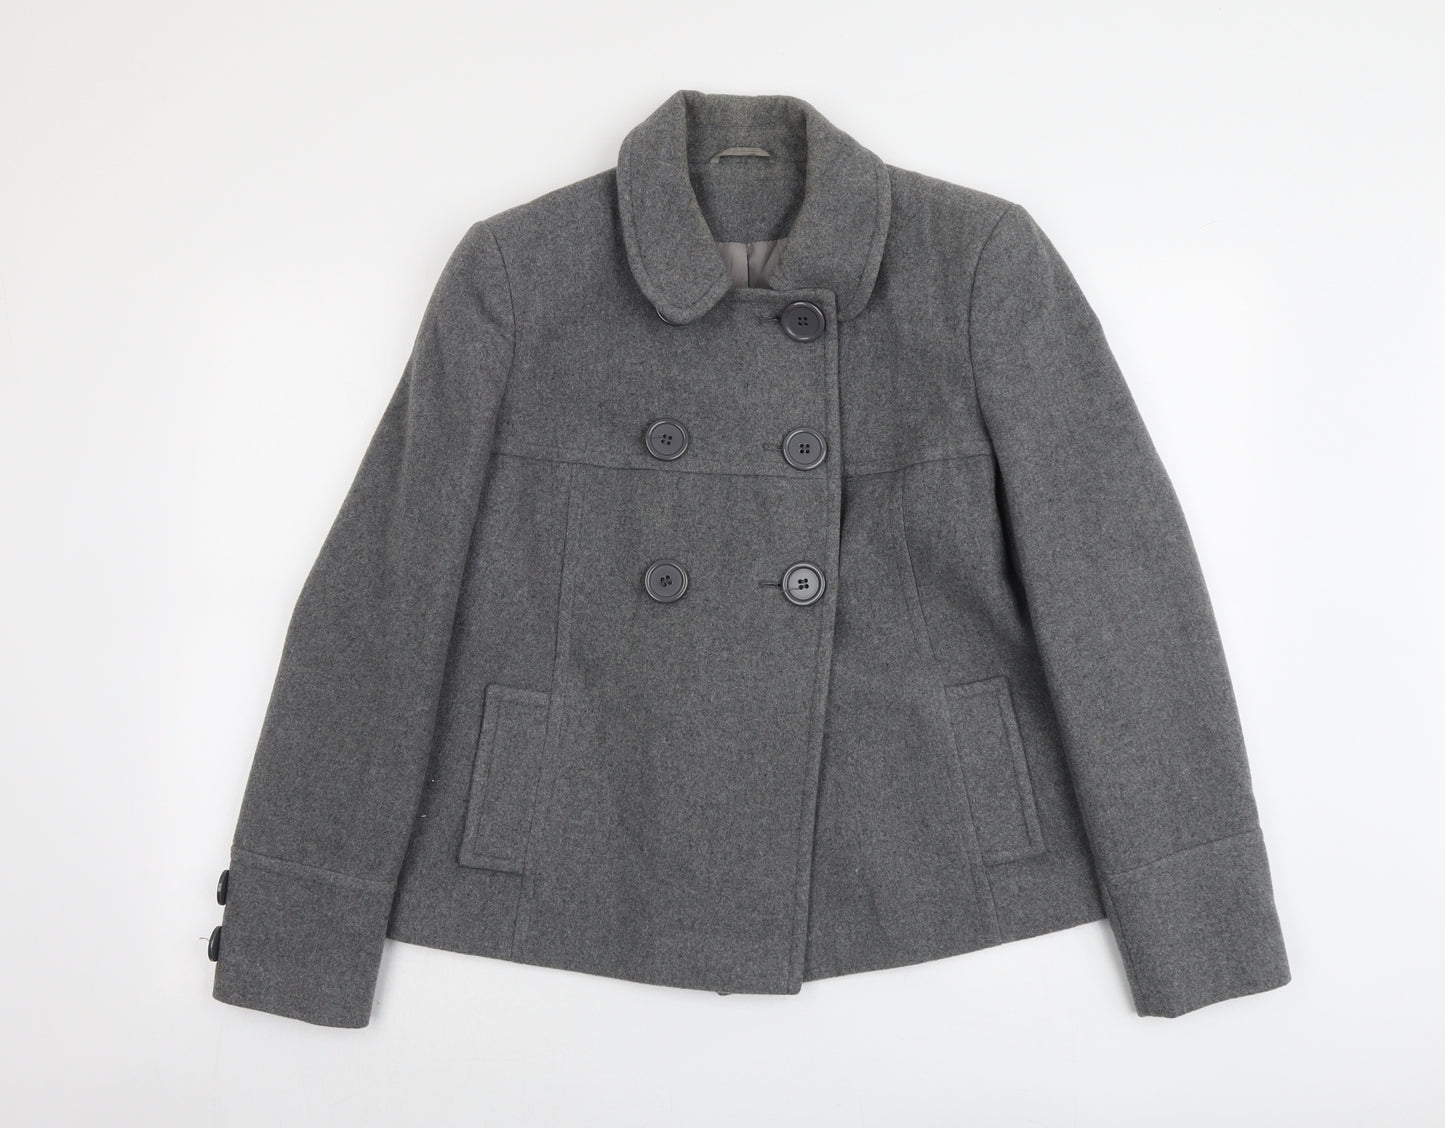 Dorothy Perkins Womens Grey Jacket Size 14 Button